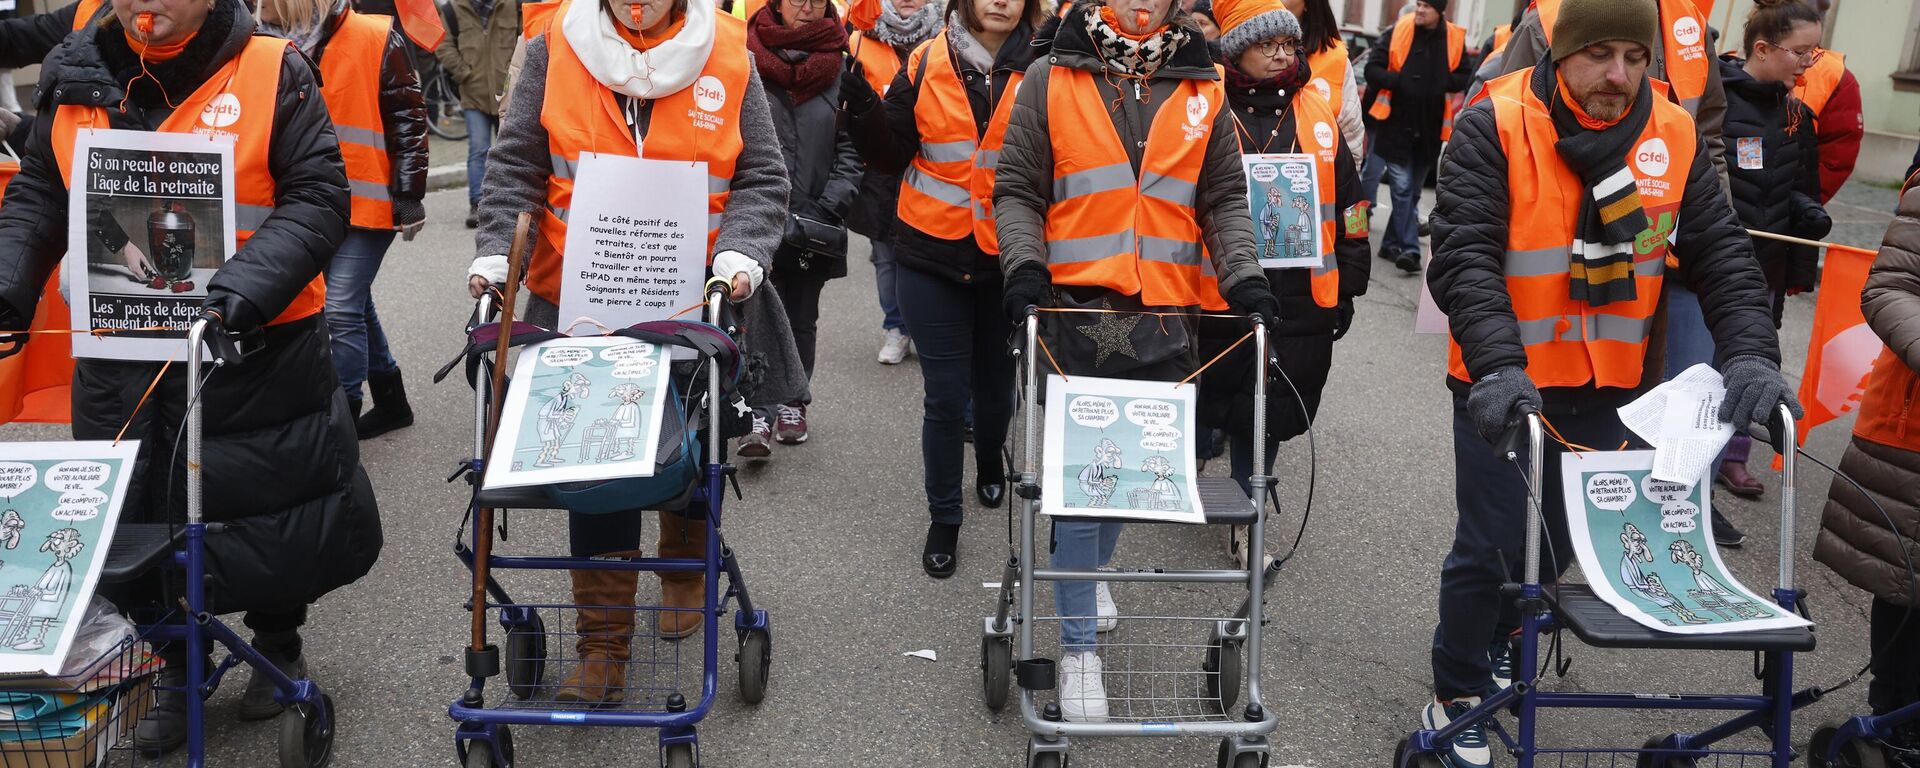 Protestors march with walkers as they demonstrate against proposed pension changes,Thursday, Jan. 19, 2023 in Strasbourg, eastern France.  - Sputnik International, 1920, 02.03.2023